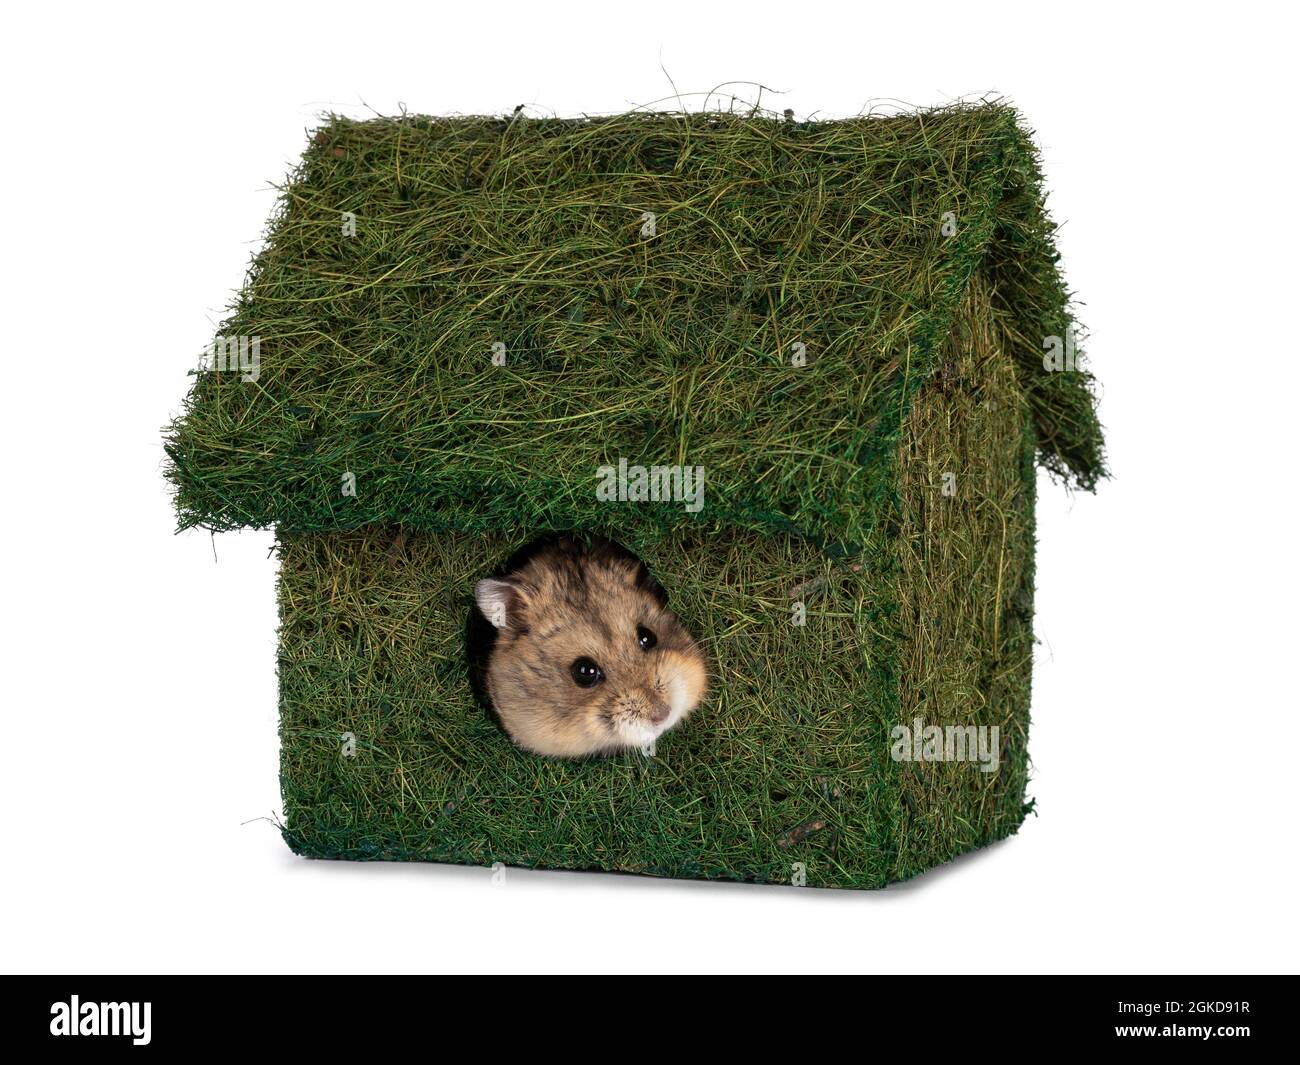 Little house mad of grass. Hamster peeping out of it. Isolated on a white background. Stock Photo